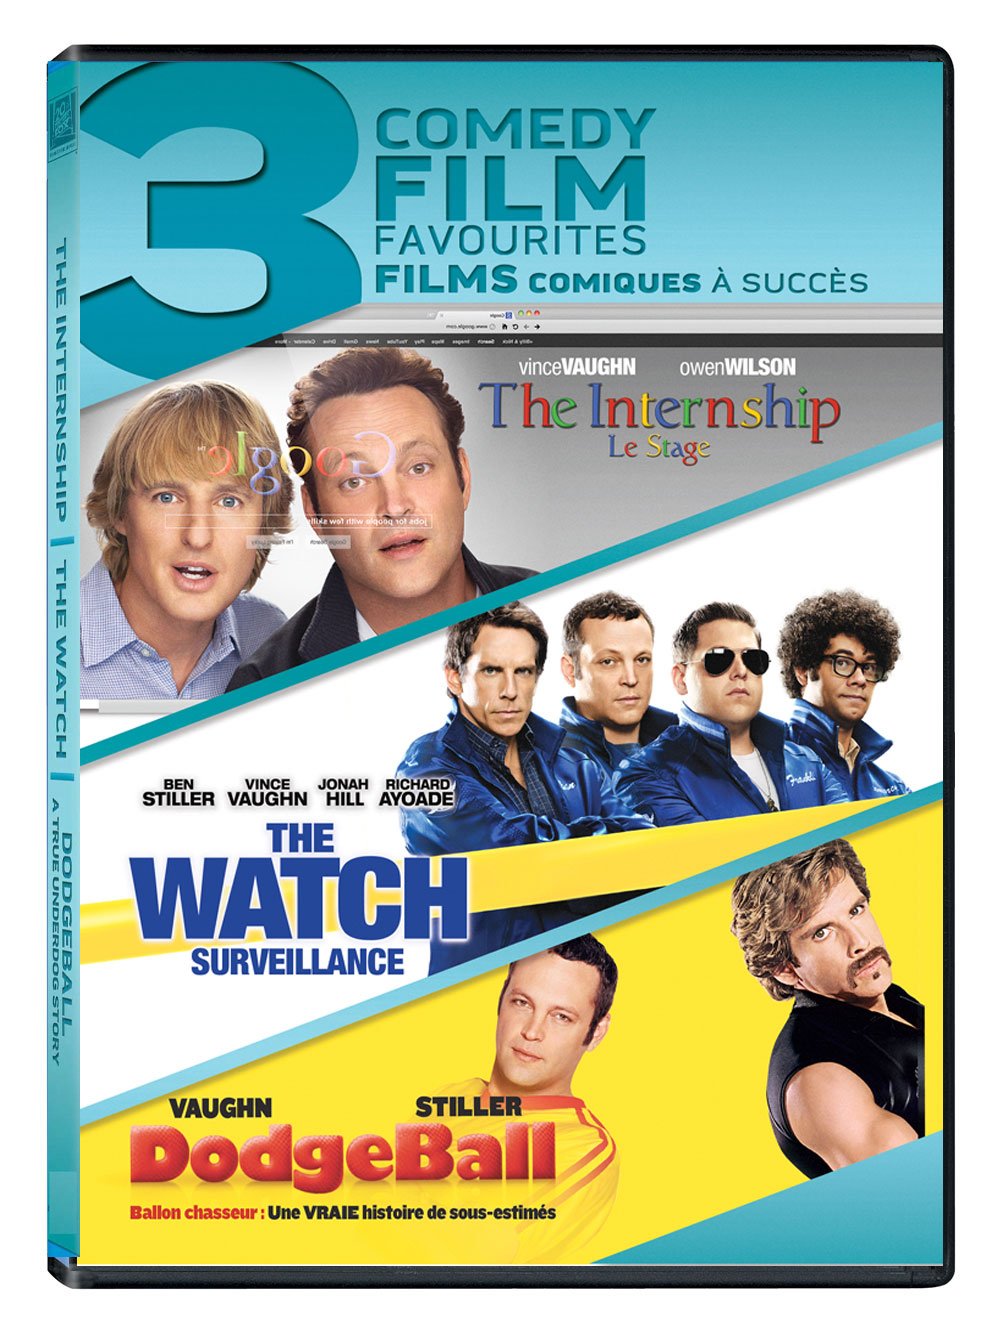 3-comedy-movies-collection-the-internship-the-watch-dodgeball-3-disc-box-set